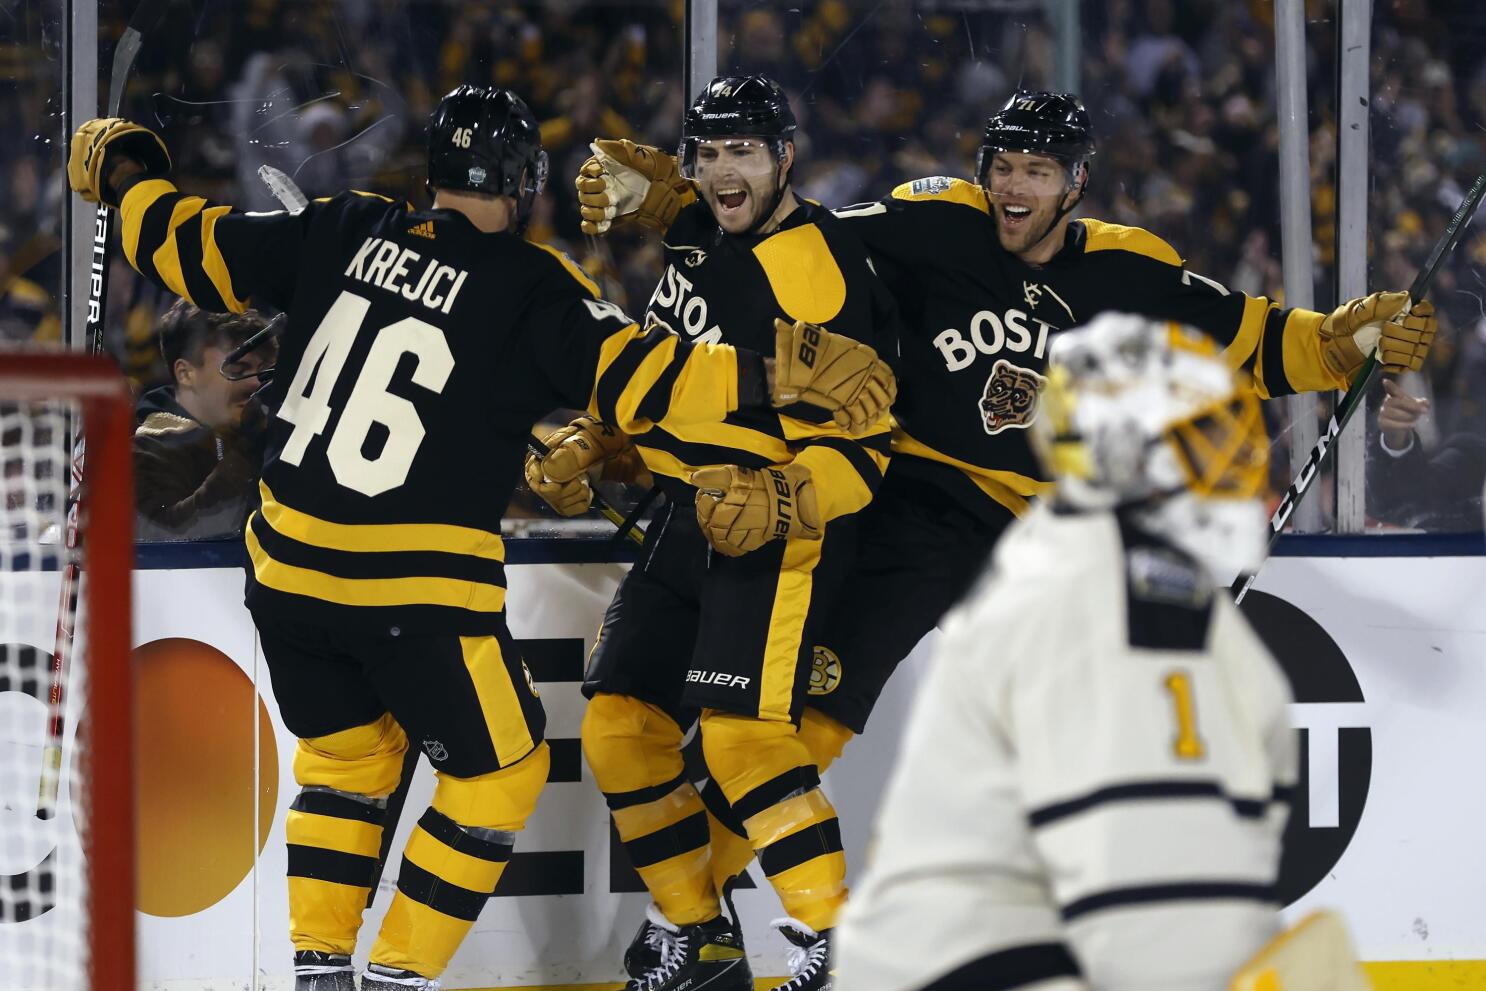 Penguins to Play Bruins in 2023 Winter Classic - The Hockey News